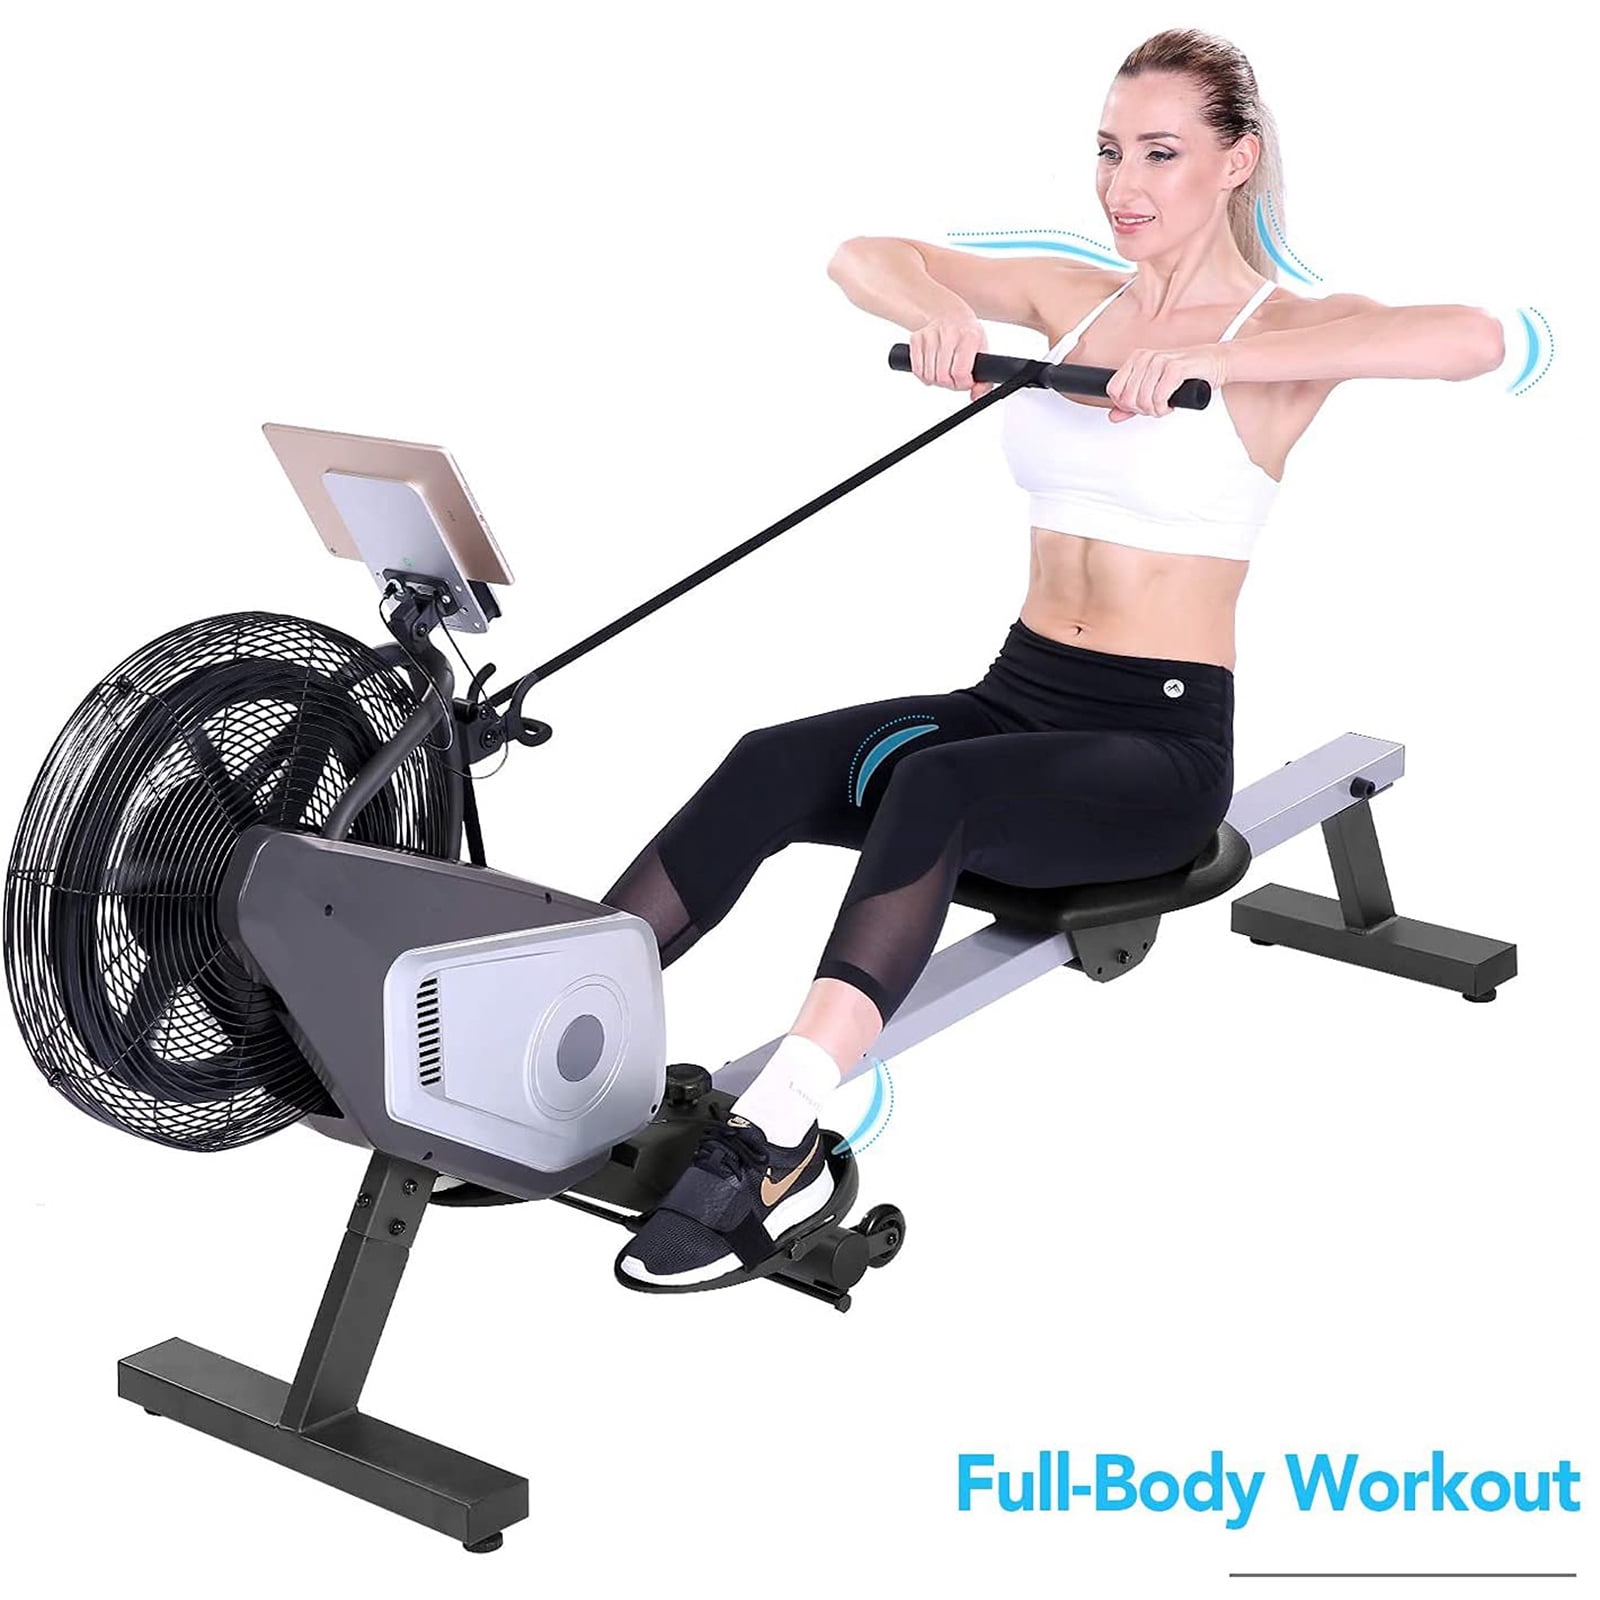 Magnetic Rowing Machine Foldable Rowing Machines for Home Use Full Body Workout Machine Quiet Adjustable Resistance Exercise Equipment w/LCD Monitor R60 